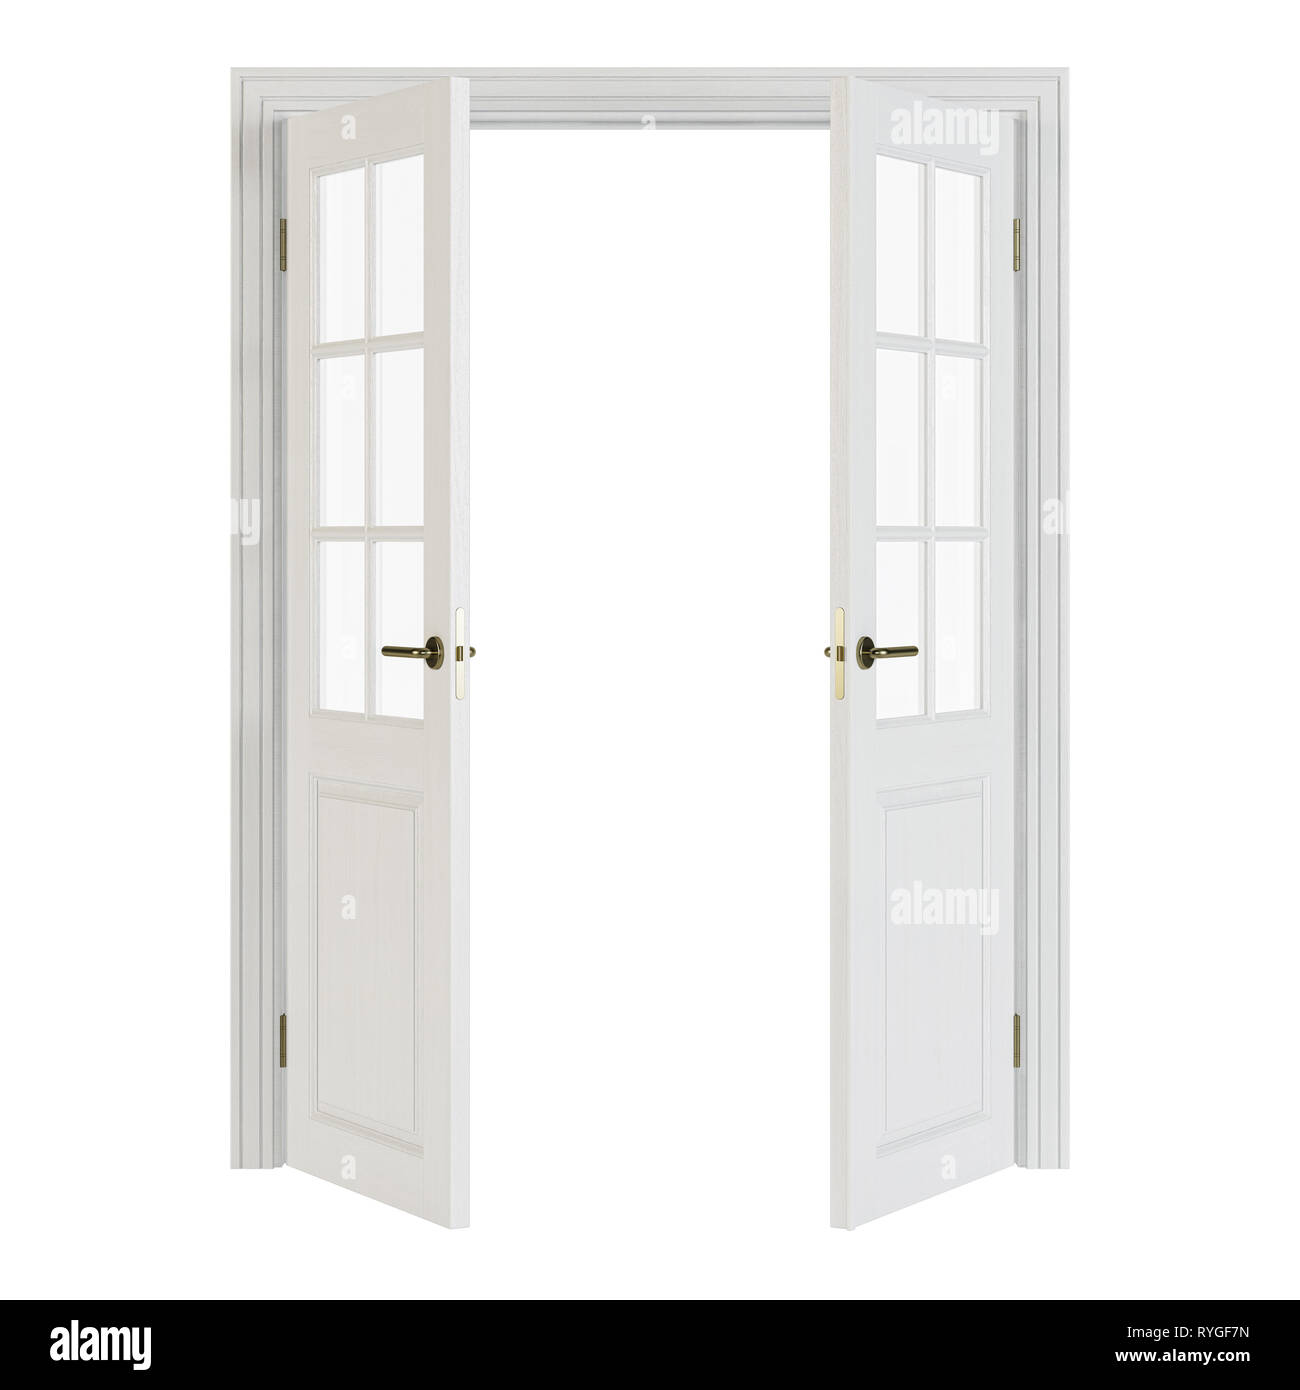 Double-leaf doors with glass. Interior doors isolated on white background. 3D rendering. Stock Photo